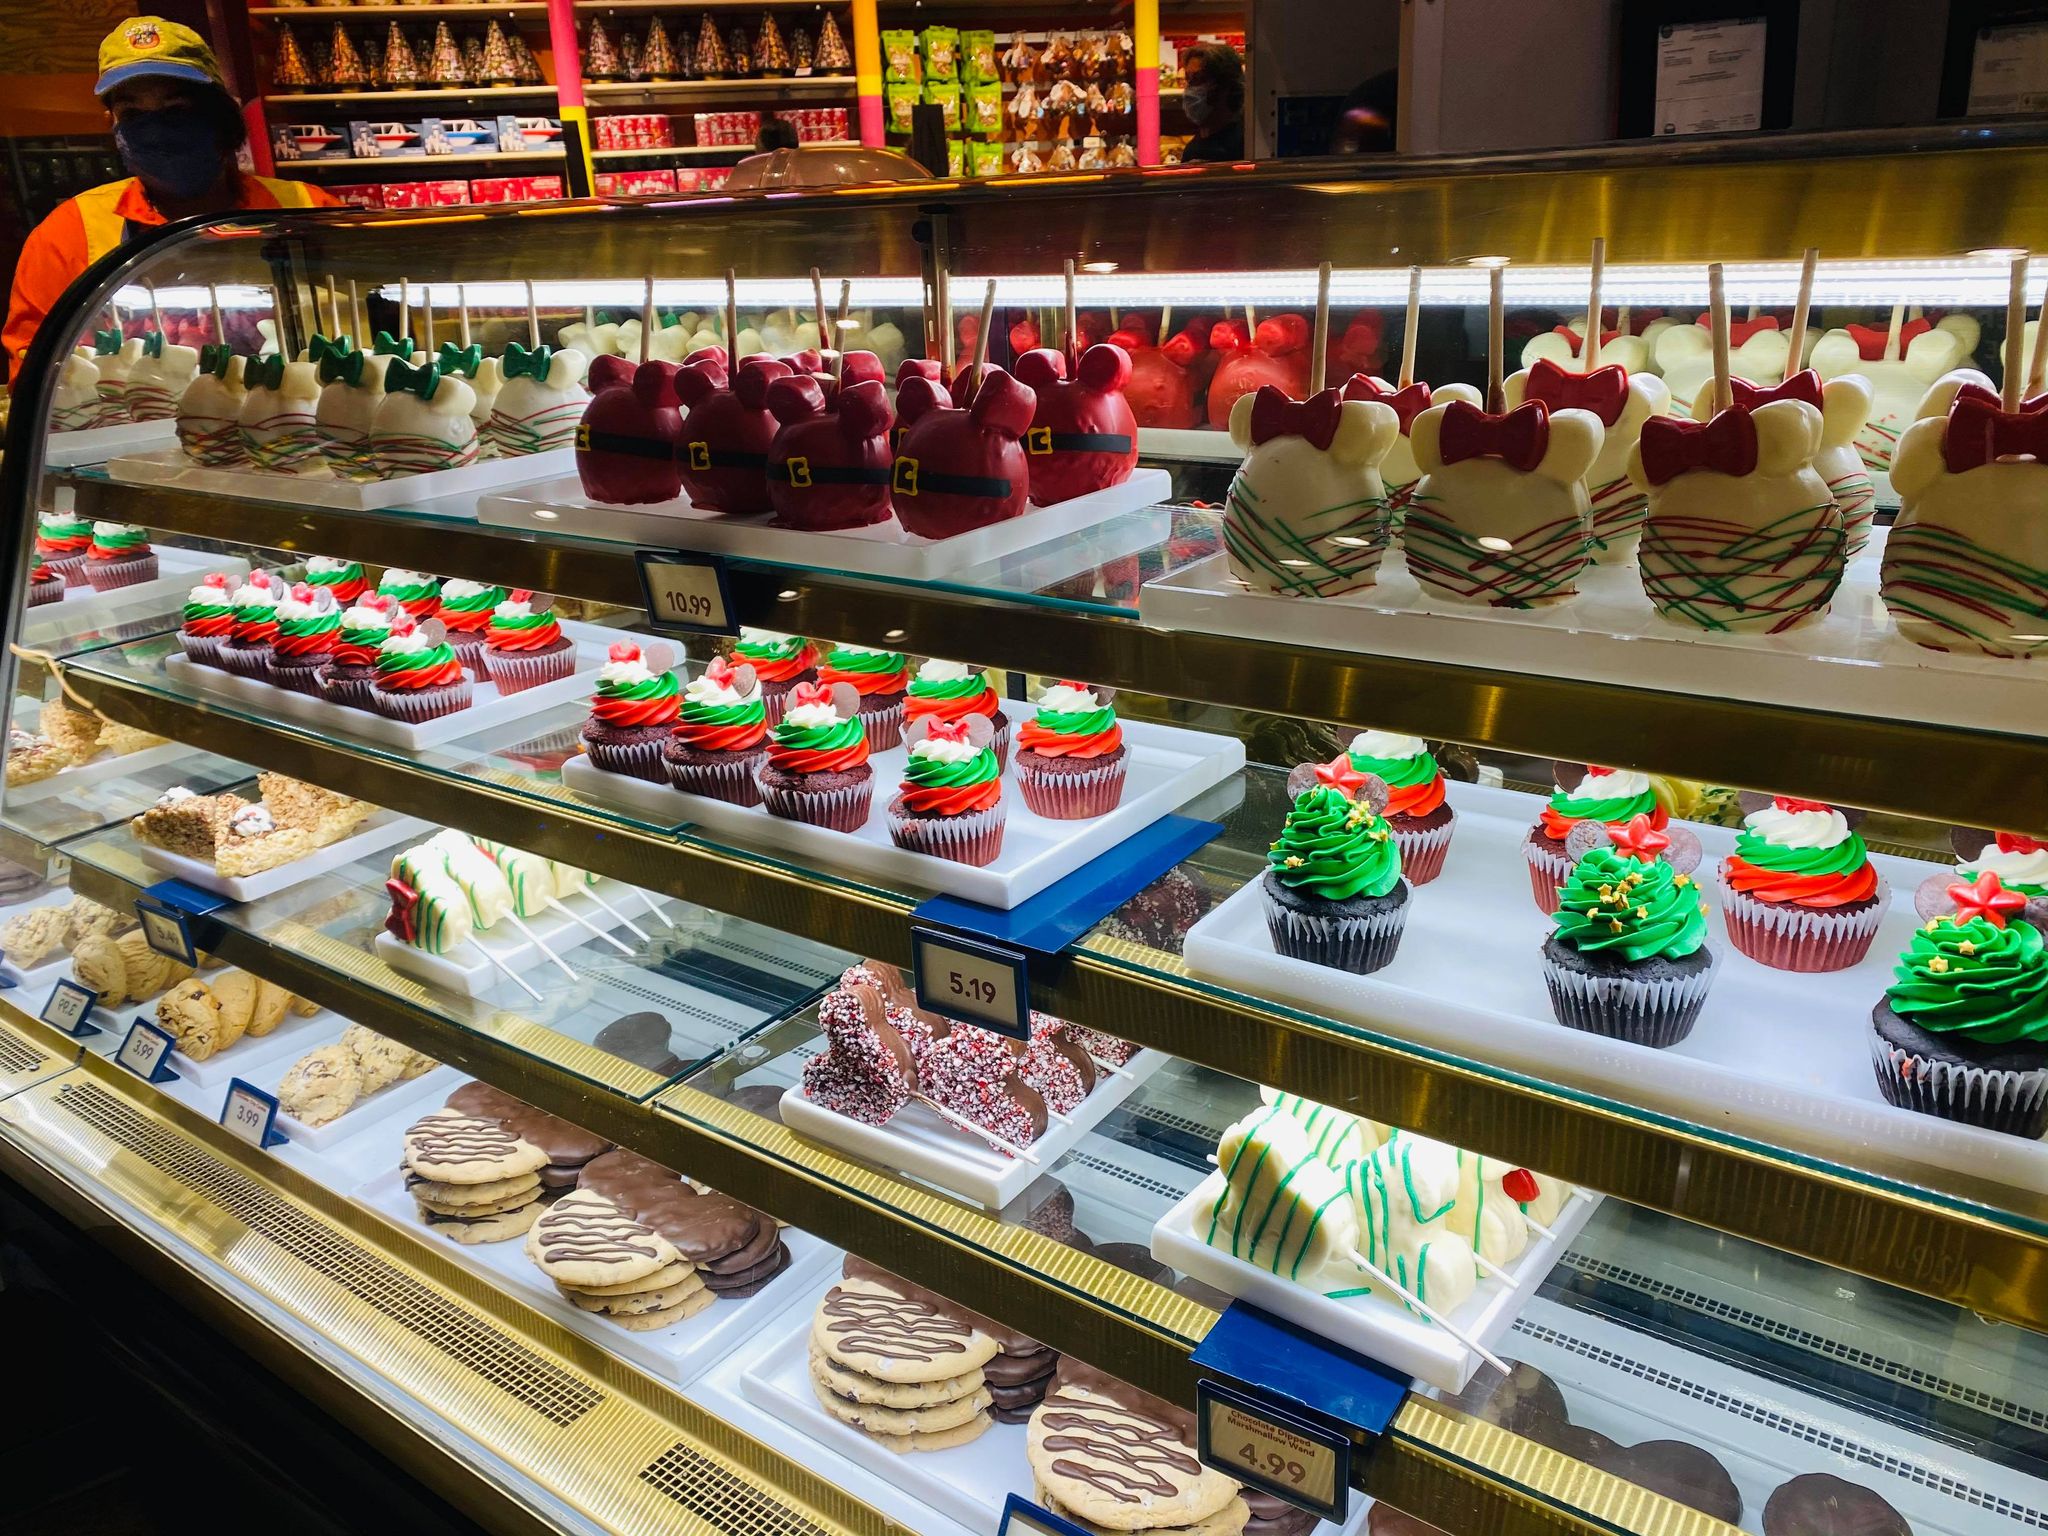 ChristmasThemed Treats Have Arrived at Goofy's Candy Co In Disney